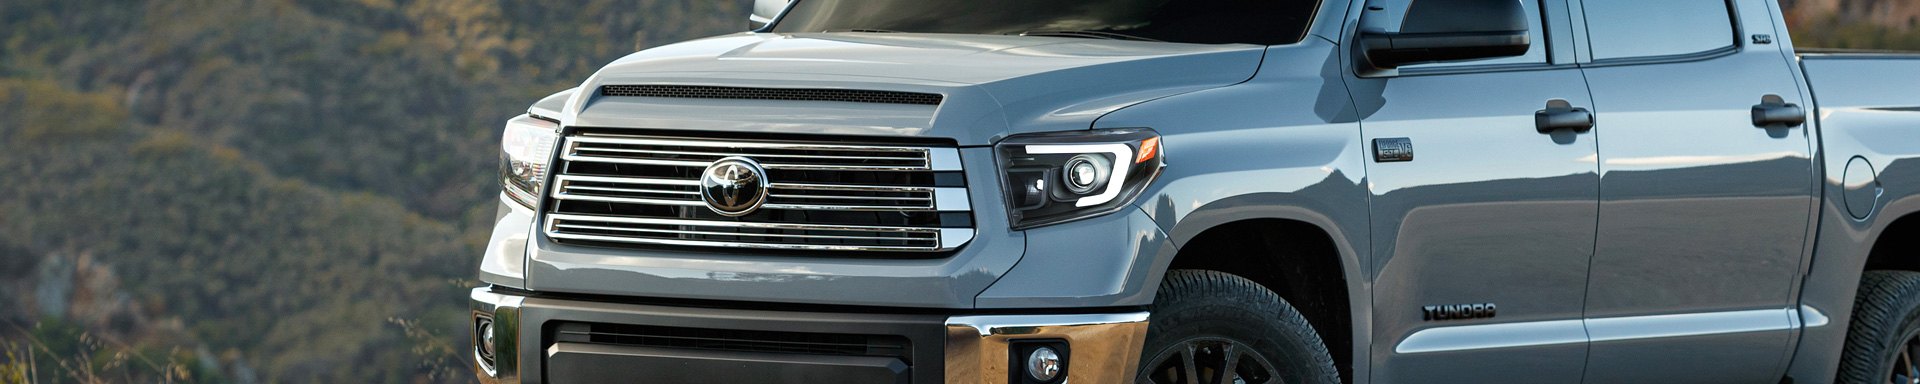 Upgrade Your Tundra with Brilliant LED Projector Headlights by Spyder